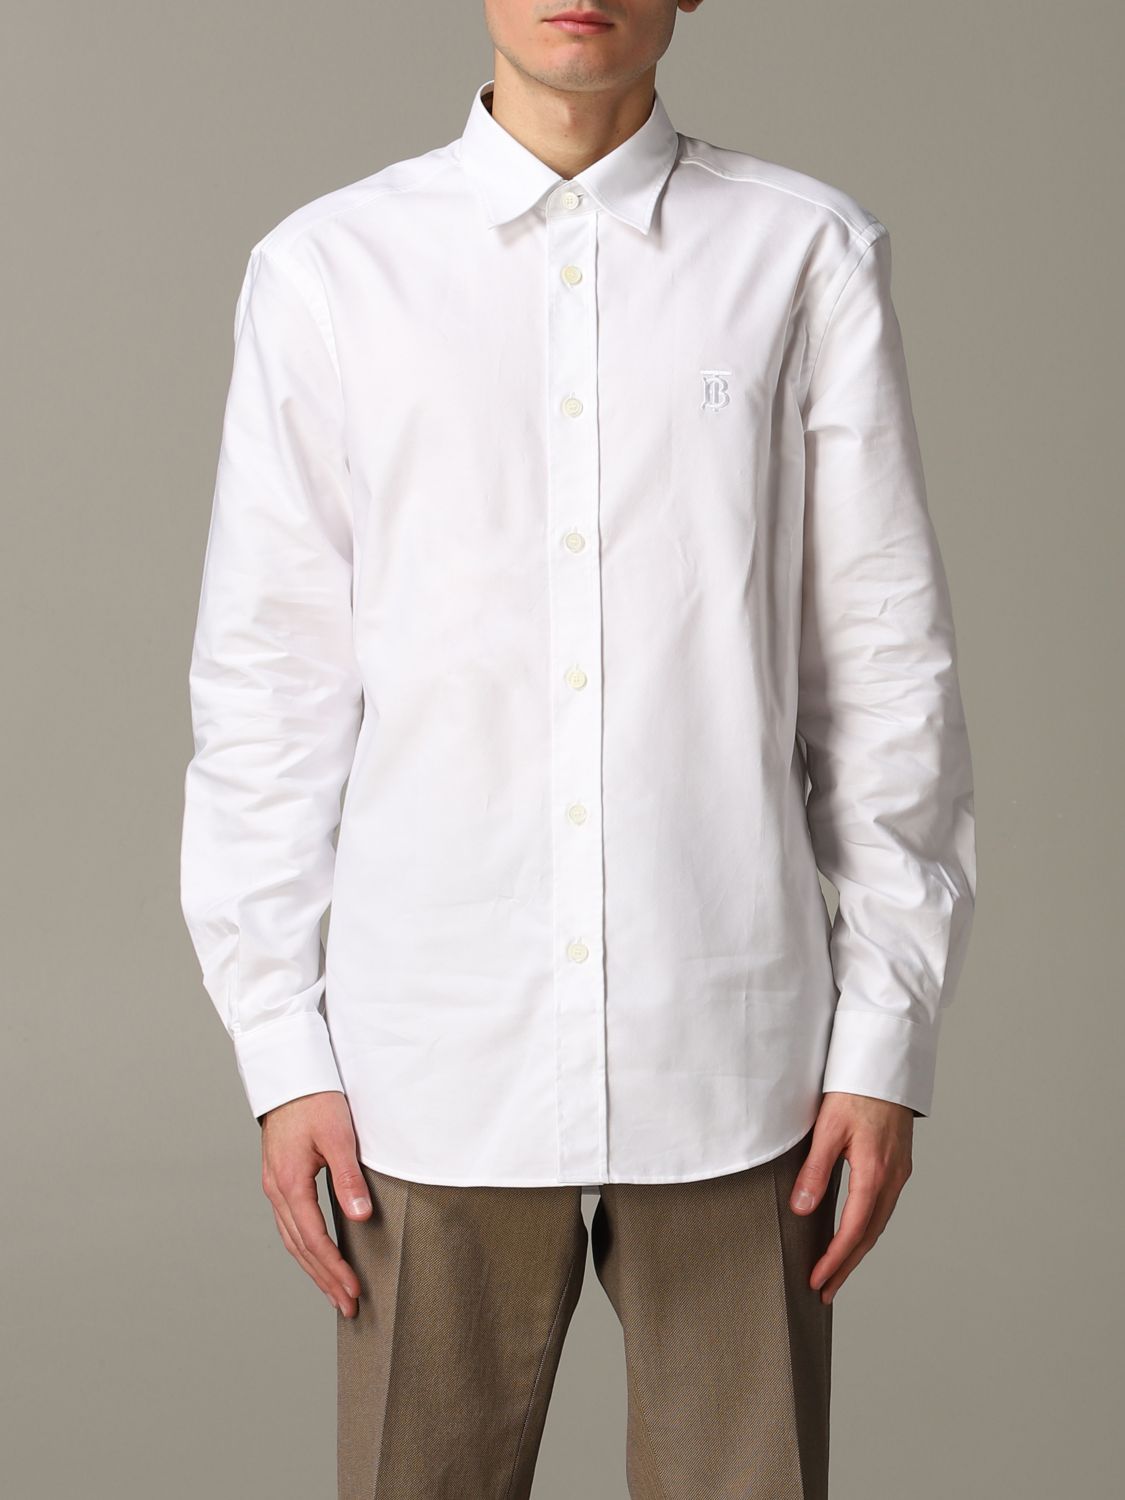 Burberry Outlet: classic shirt with Italian collar - White 